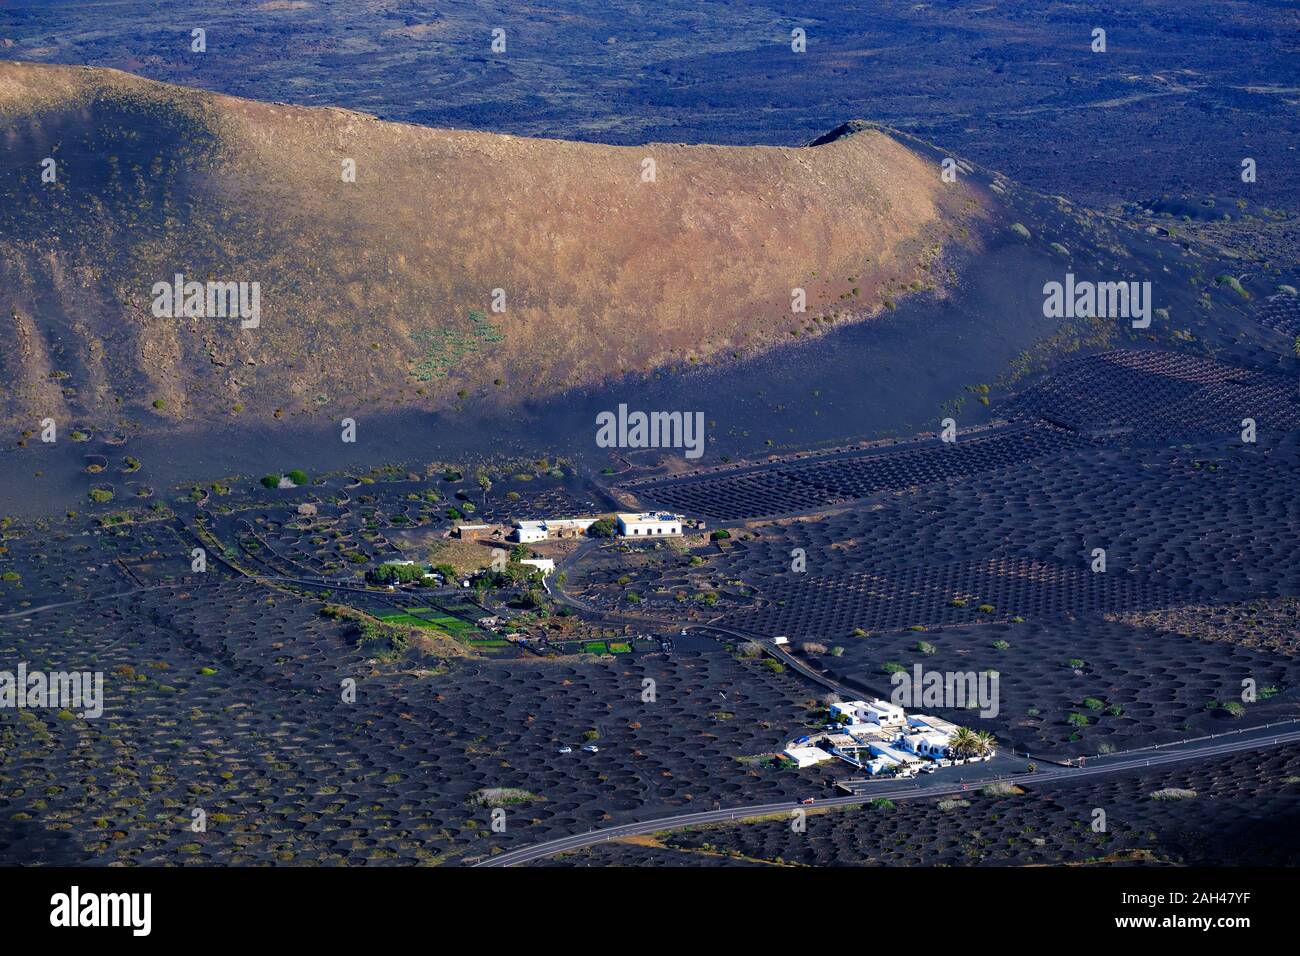 Spain, Canary Islands, Lanzarote, La Geria region, High angle view of Vineyards and hills Stock Photo